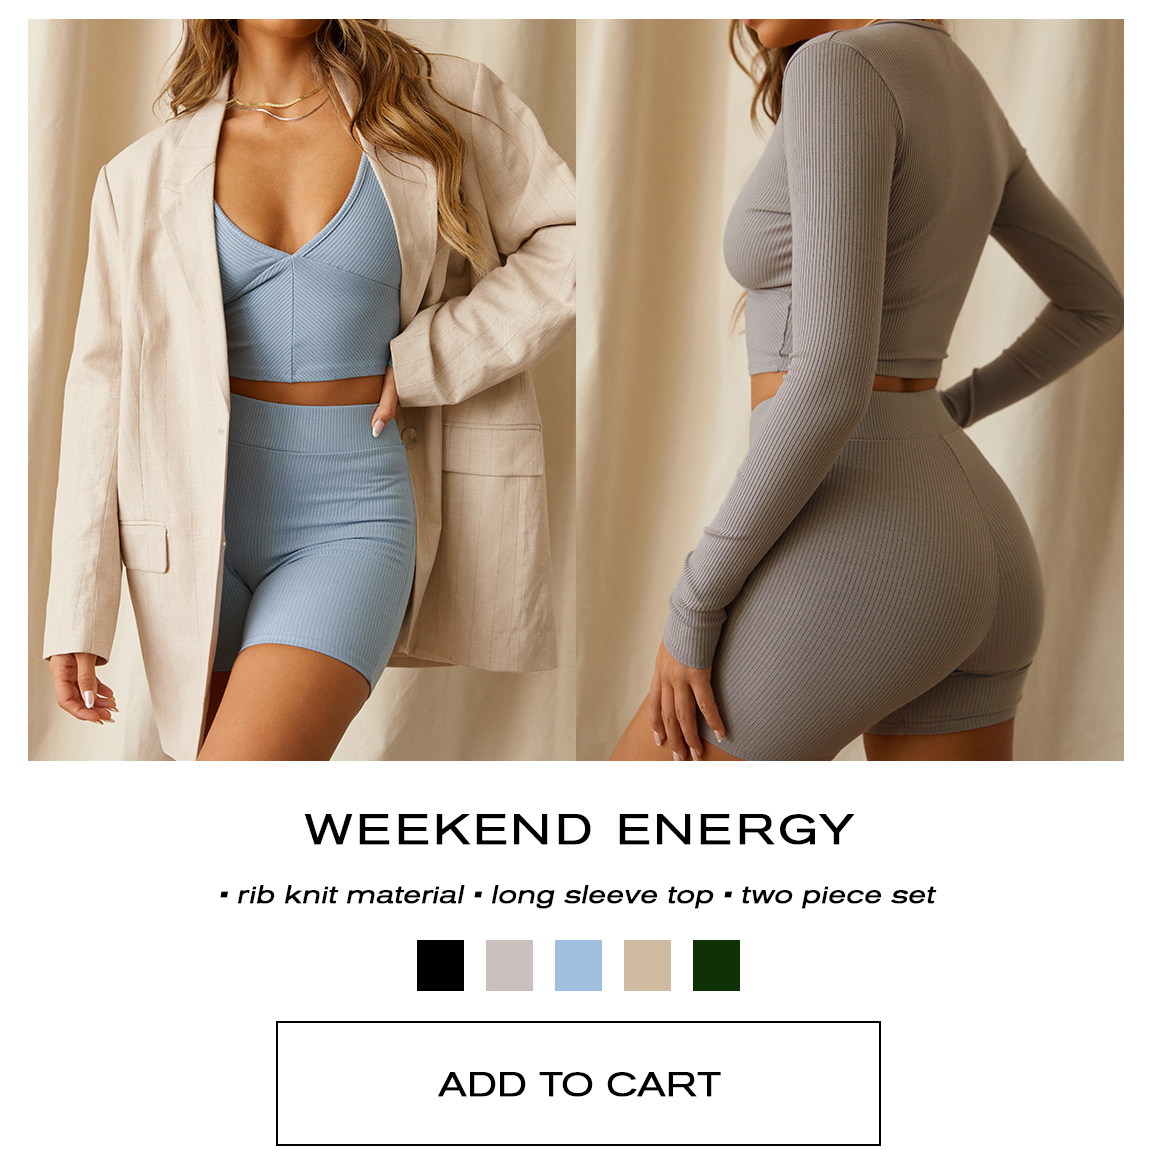  WEEKEND ENERGY rib knit material long sleeve top two piece set ADD TO CART 